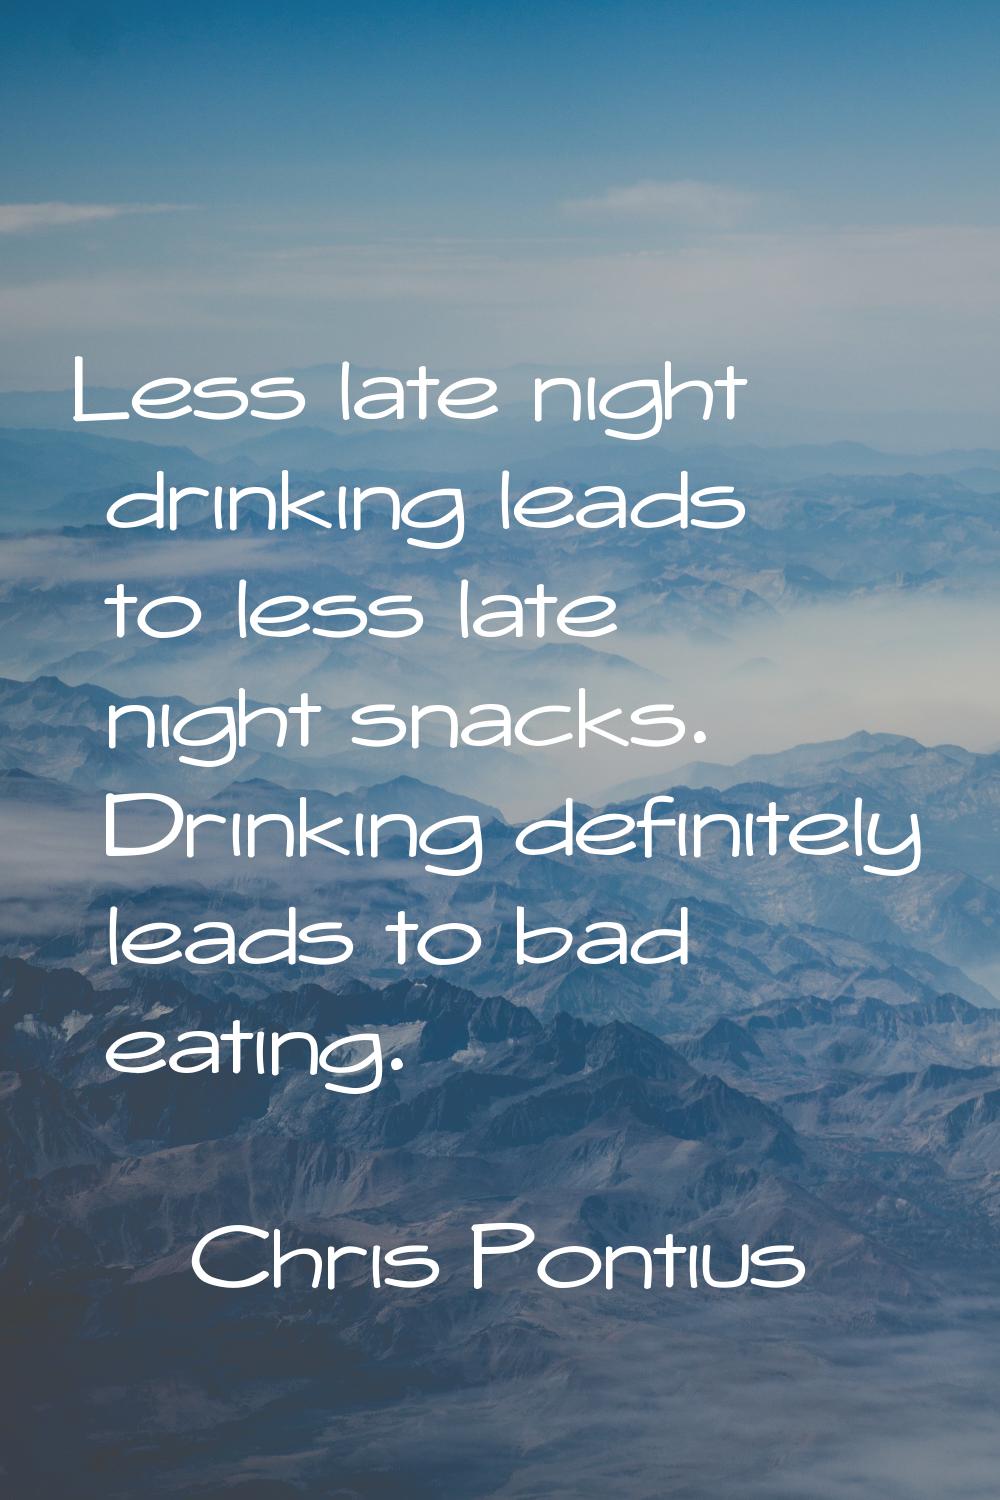 Less late night drinking leads to less late night snacks. Drinking definitely leads to bad eating.